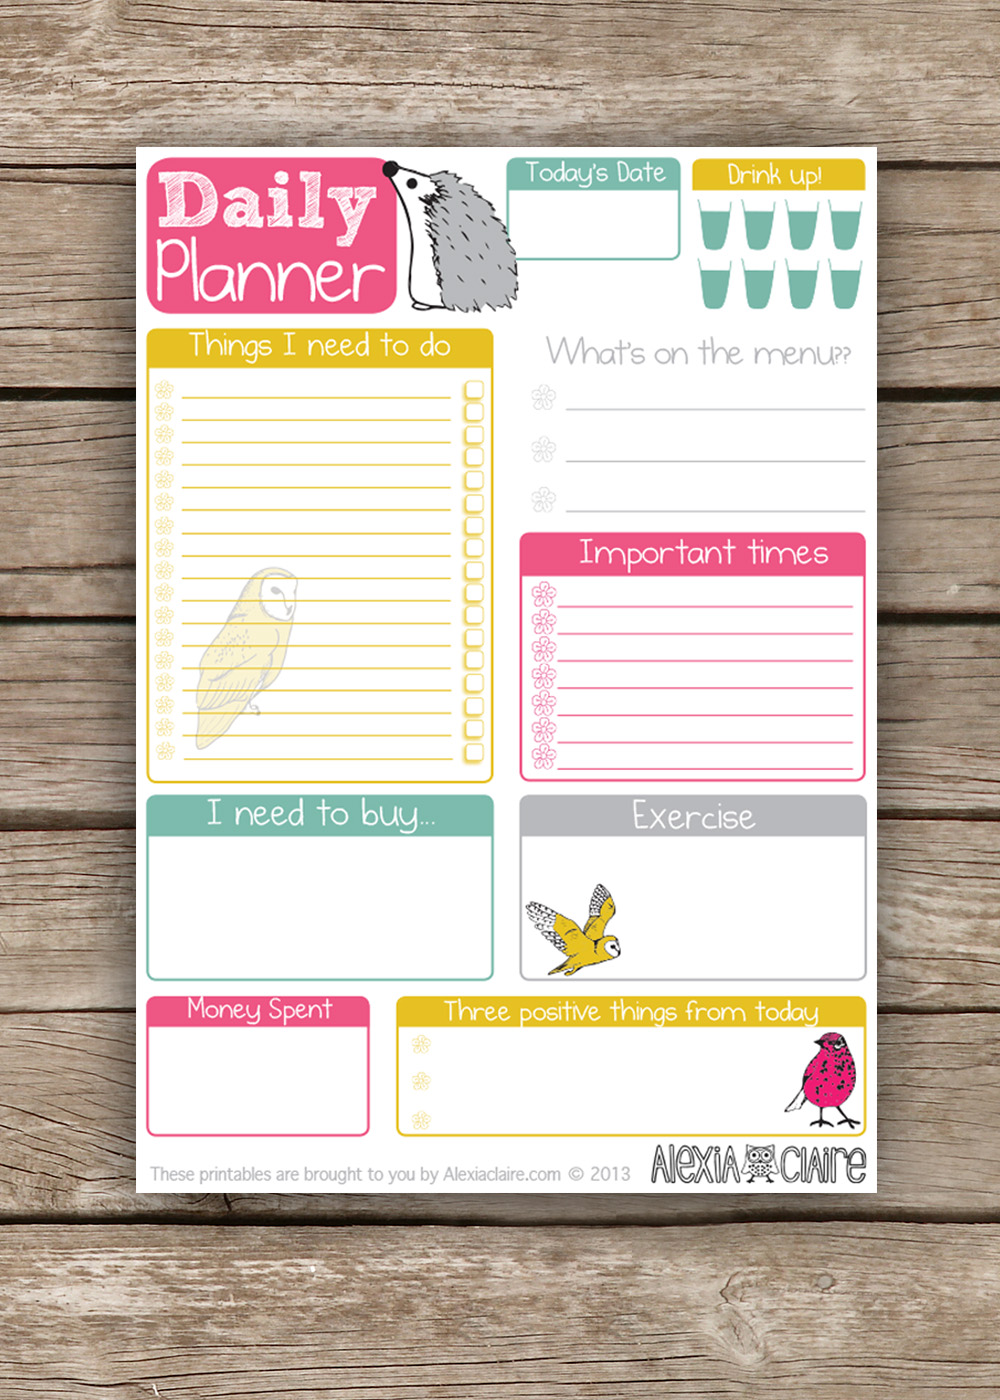 7-best-images-of-printable-daily-planner-to-do-list-template-printables-daily-planners-do